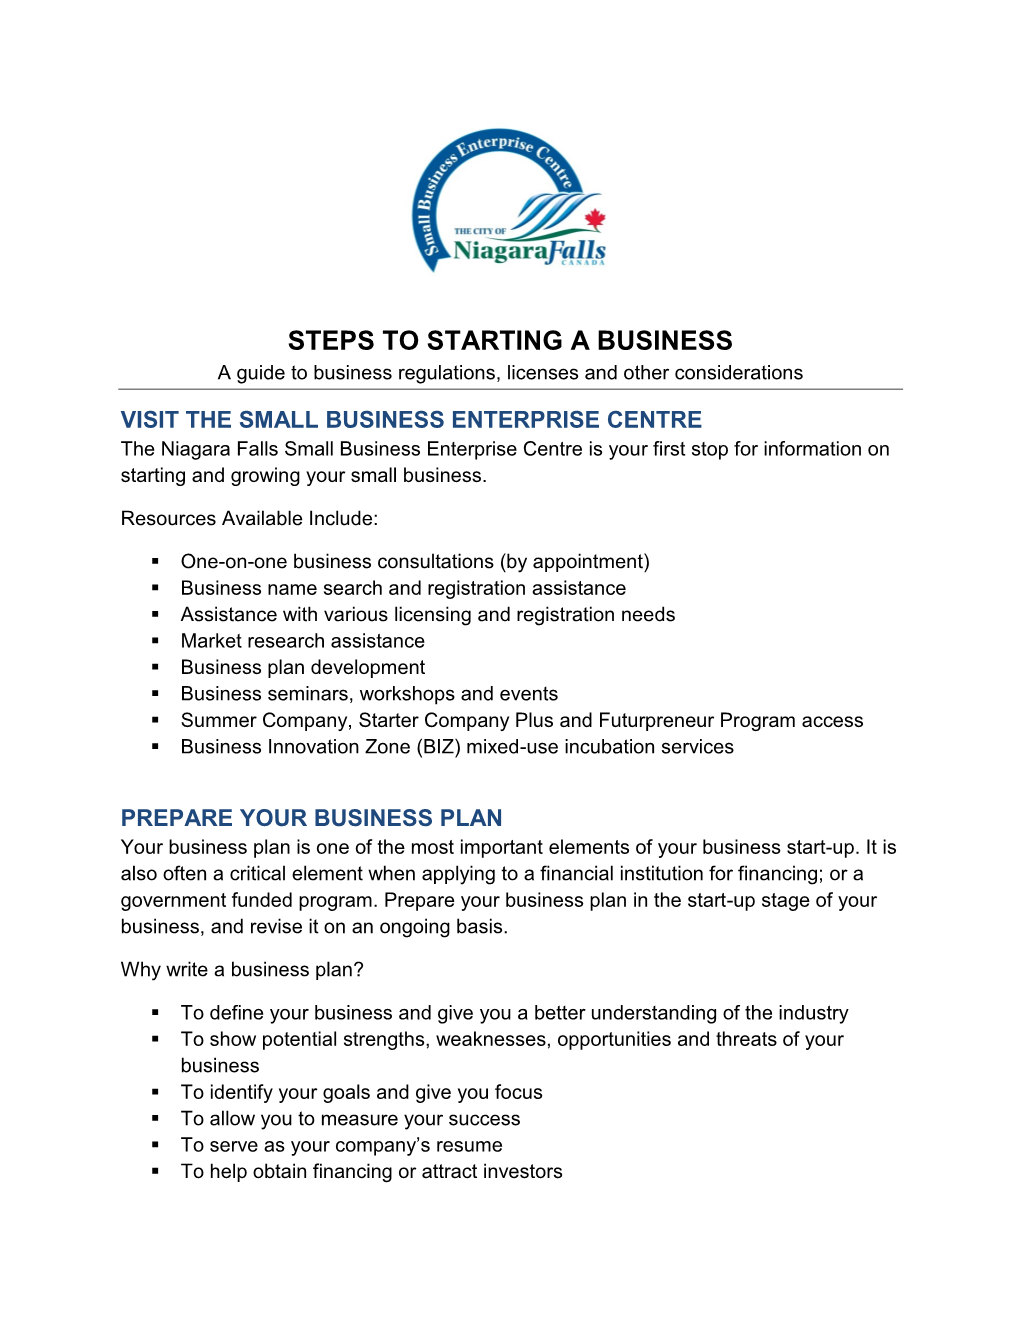 Steps in Starting a Small Business